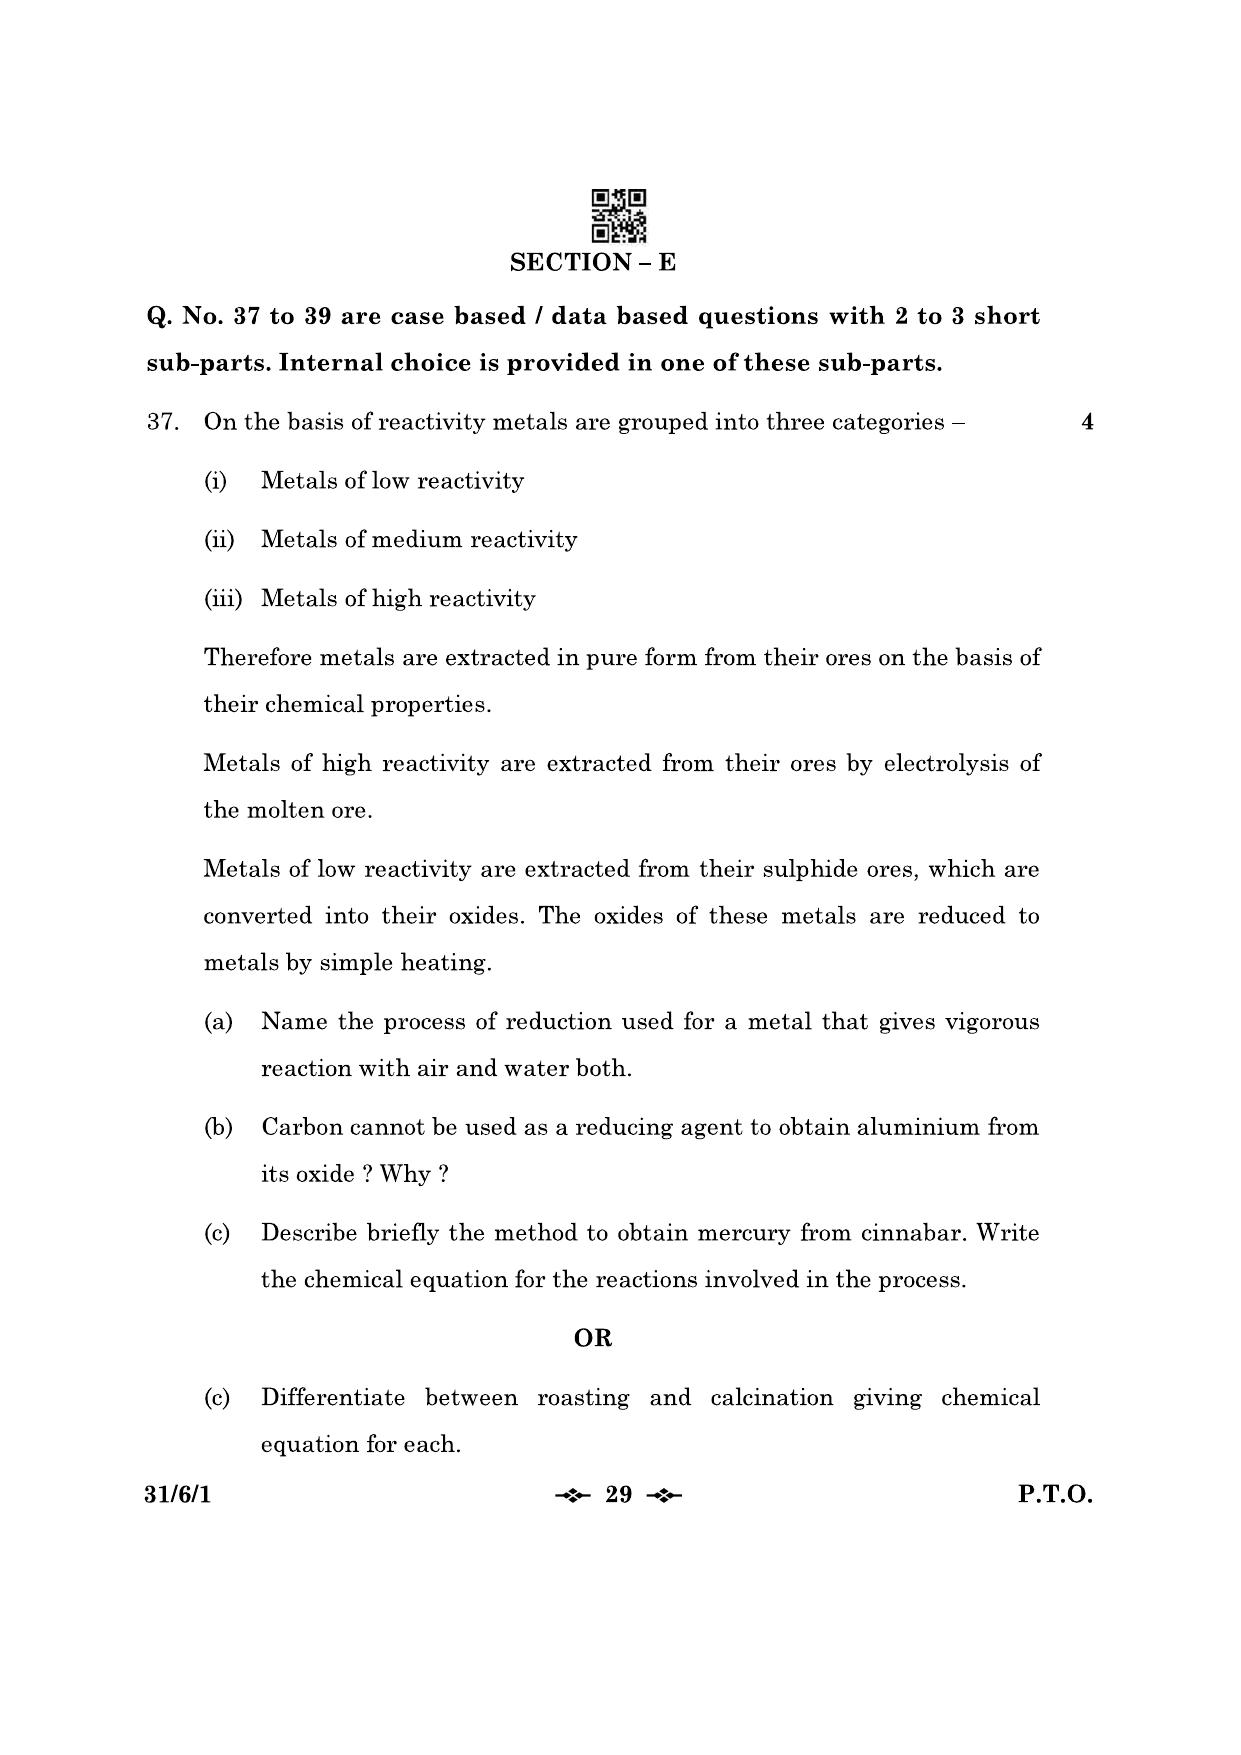 CBSE Class 10 31-6-1 Science 2023 Question Paper - Page 29